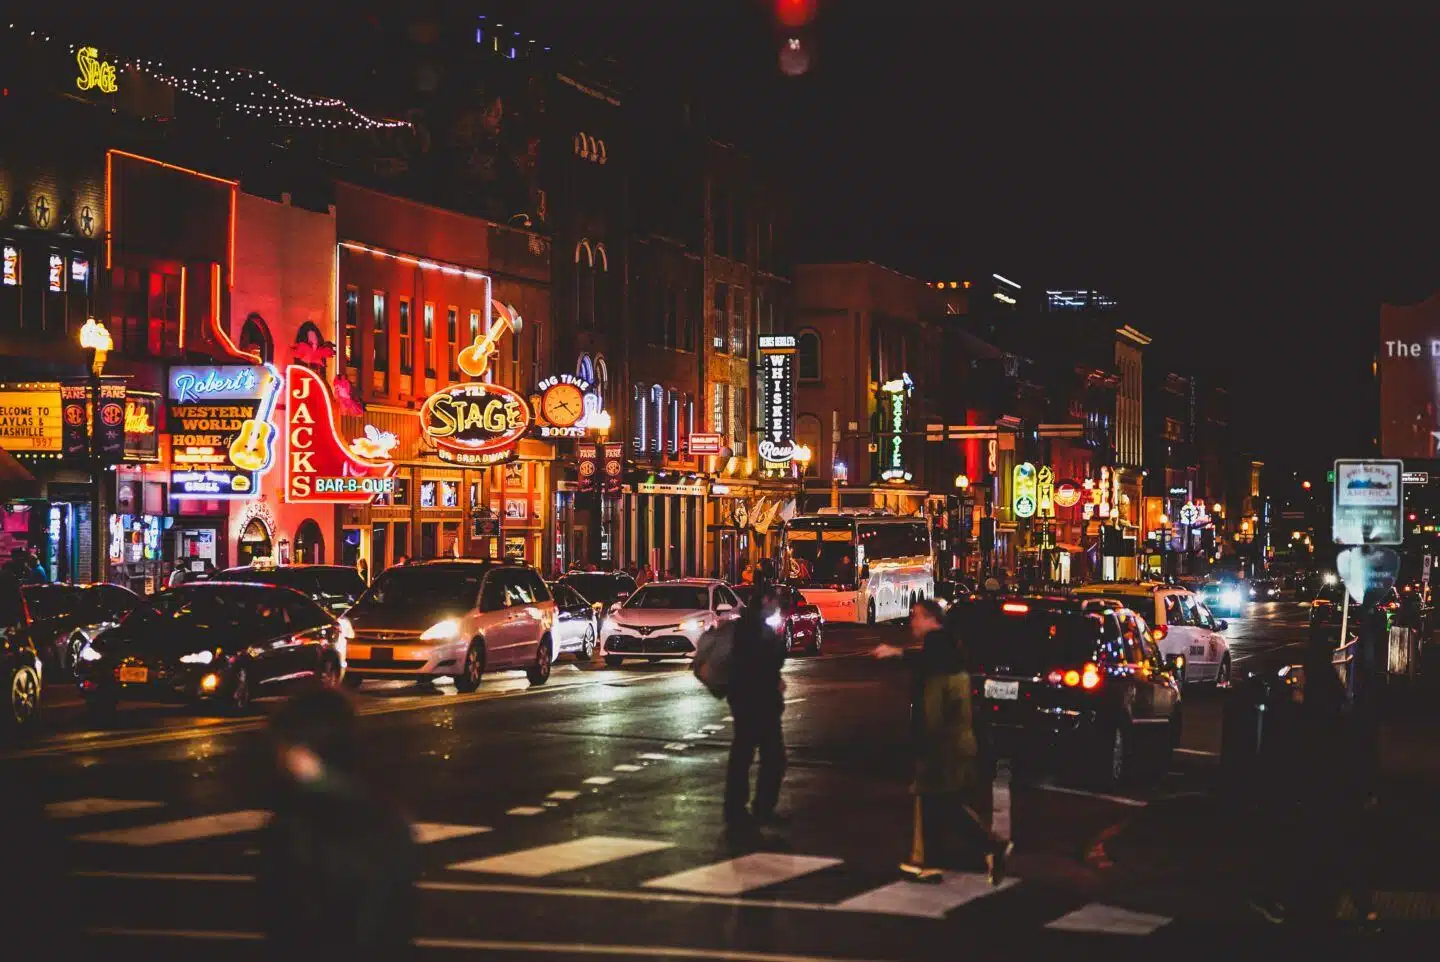 Best Places to Stay in Nashville, by Travel Blogger What The Fab